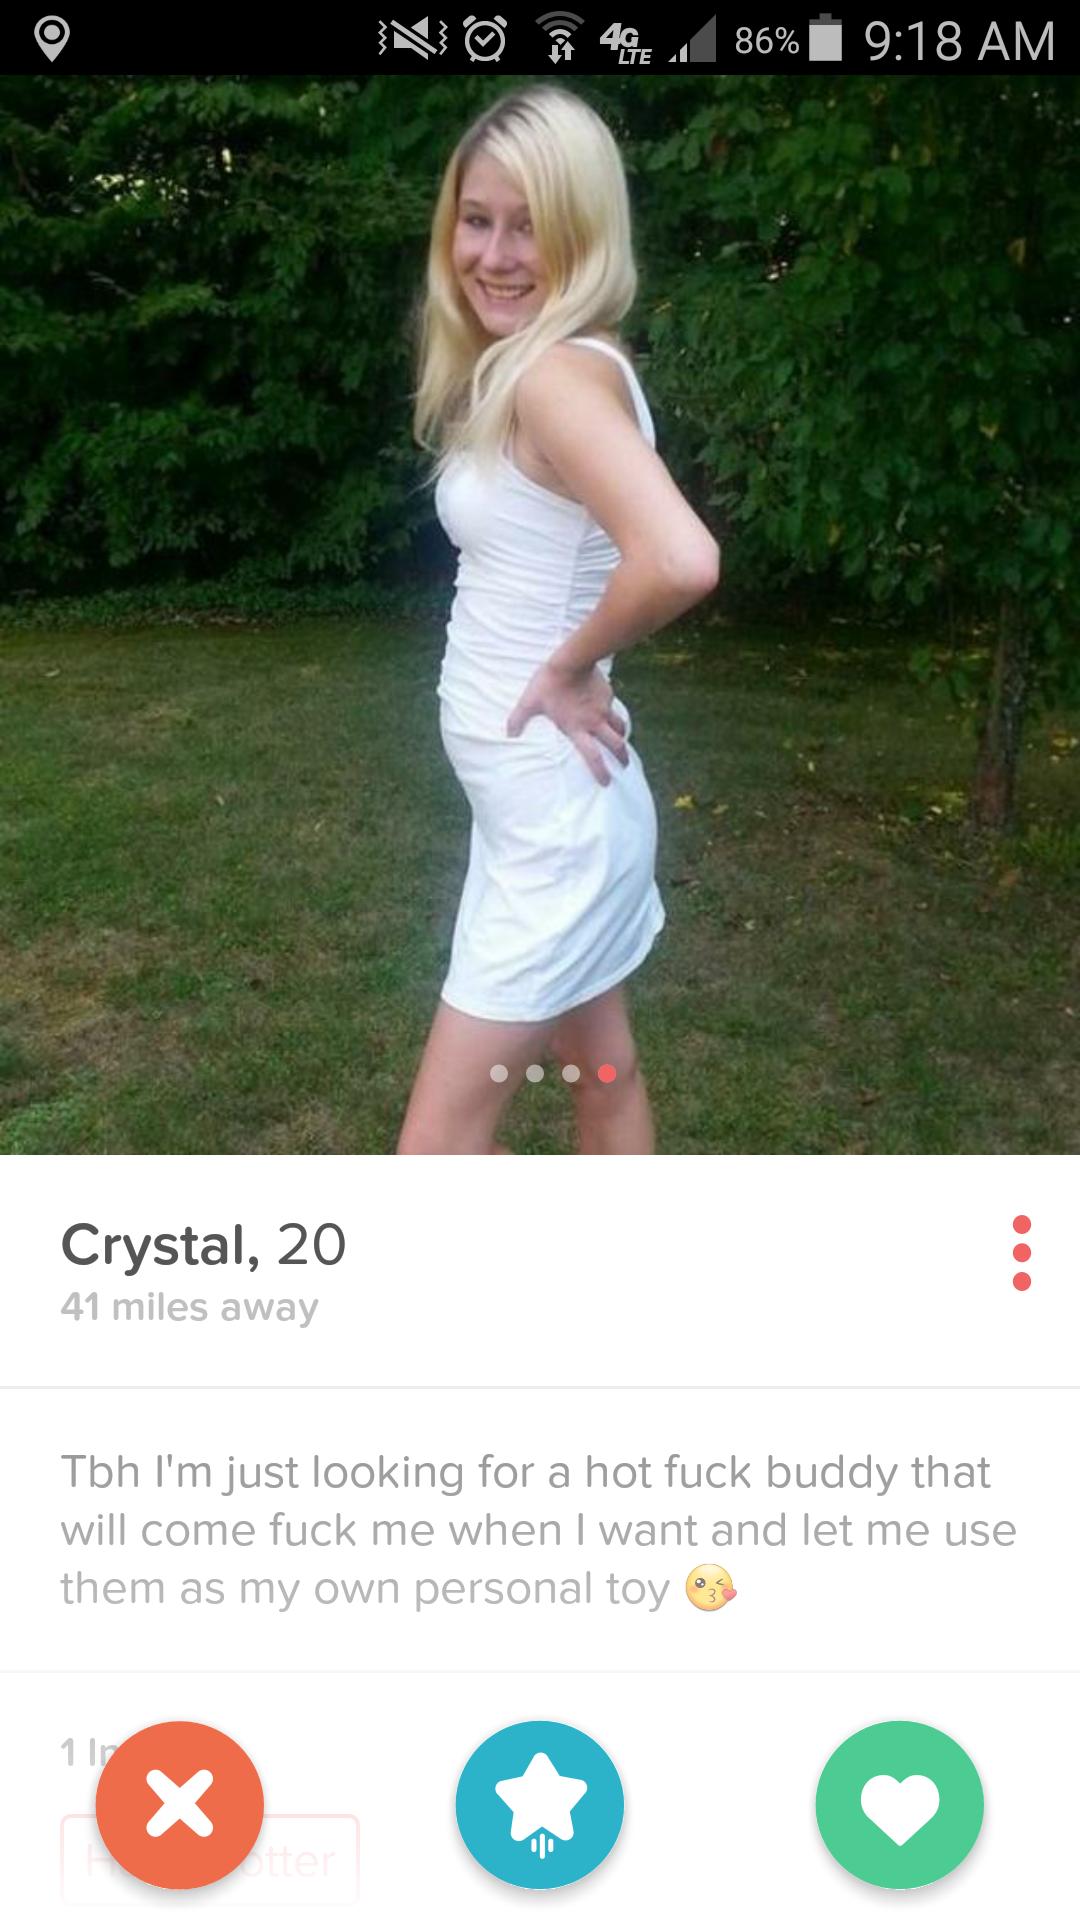 goat on tinder - N O 4914 86% Crystal, 20 41 miles away Tbh I'm just looking for a hot fuck buddy that will come fuck me when I want and let me use them as my own personal toy 3